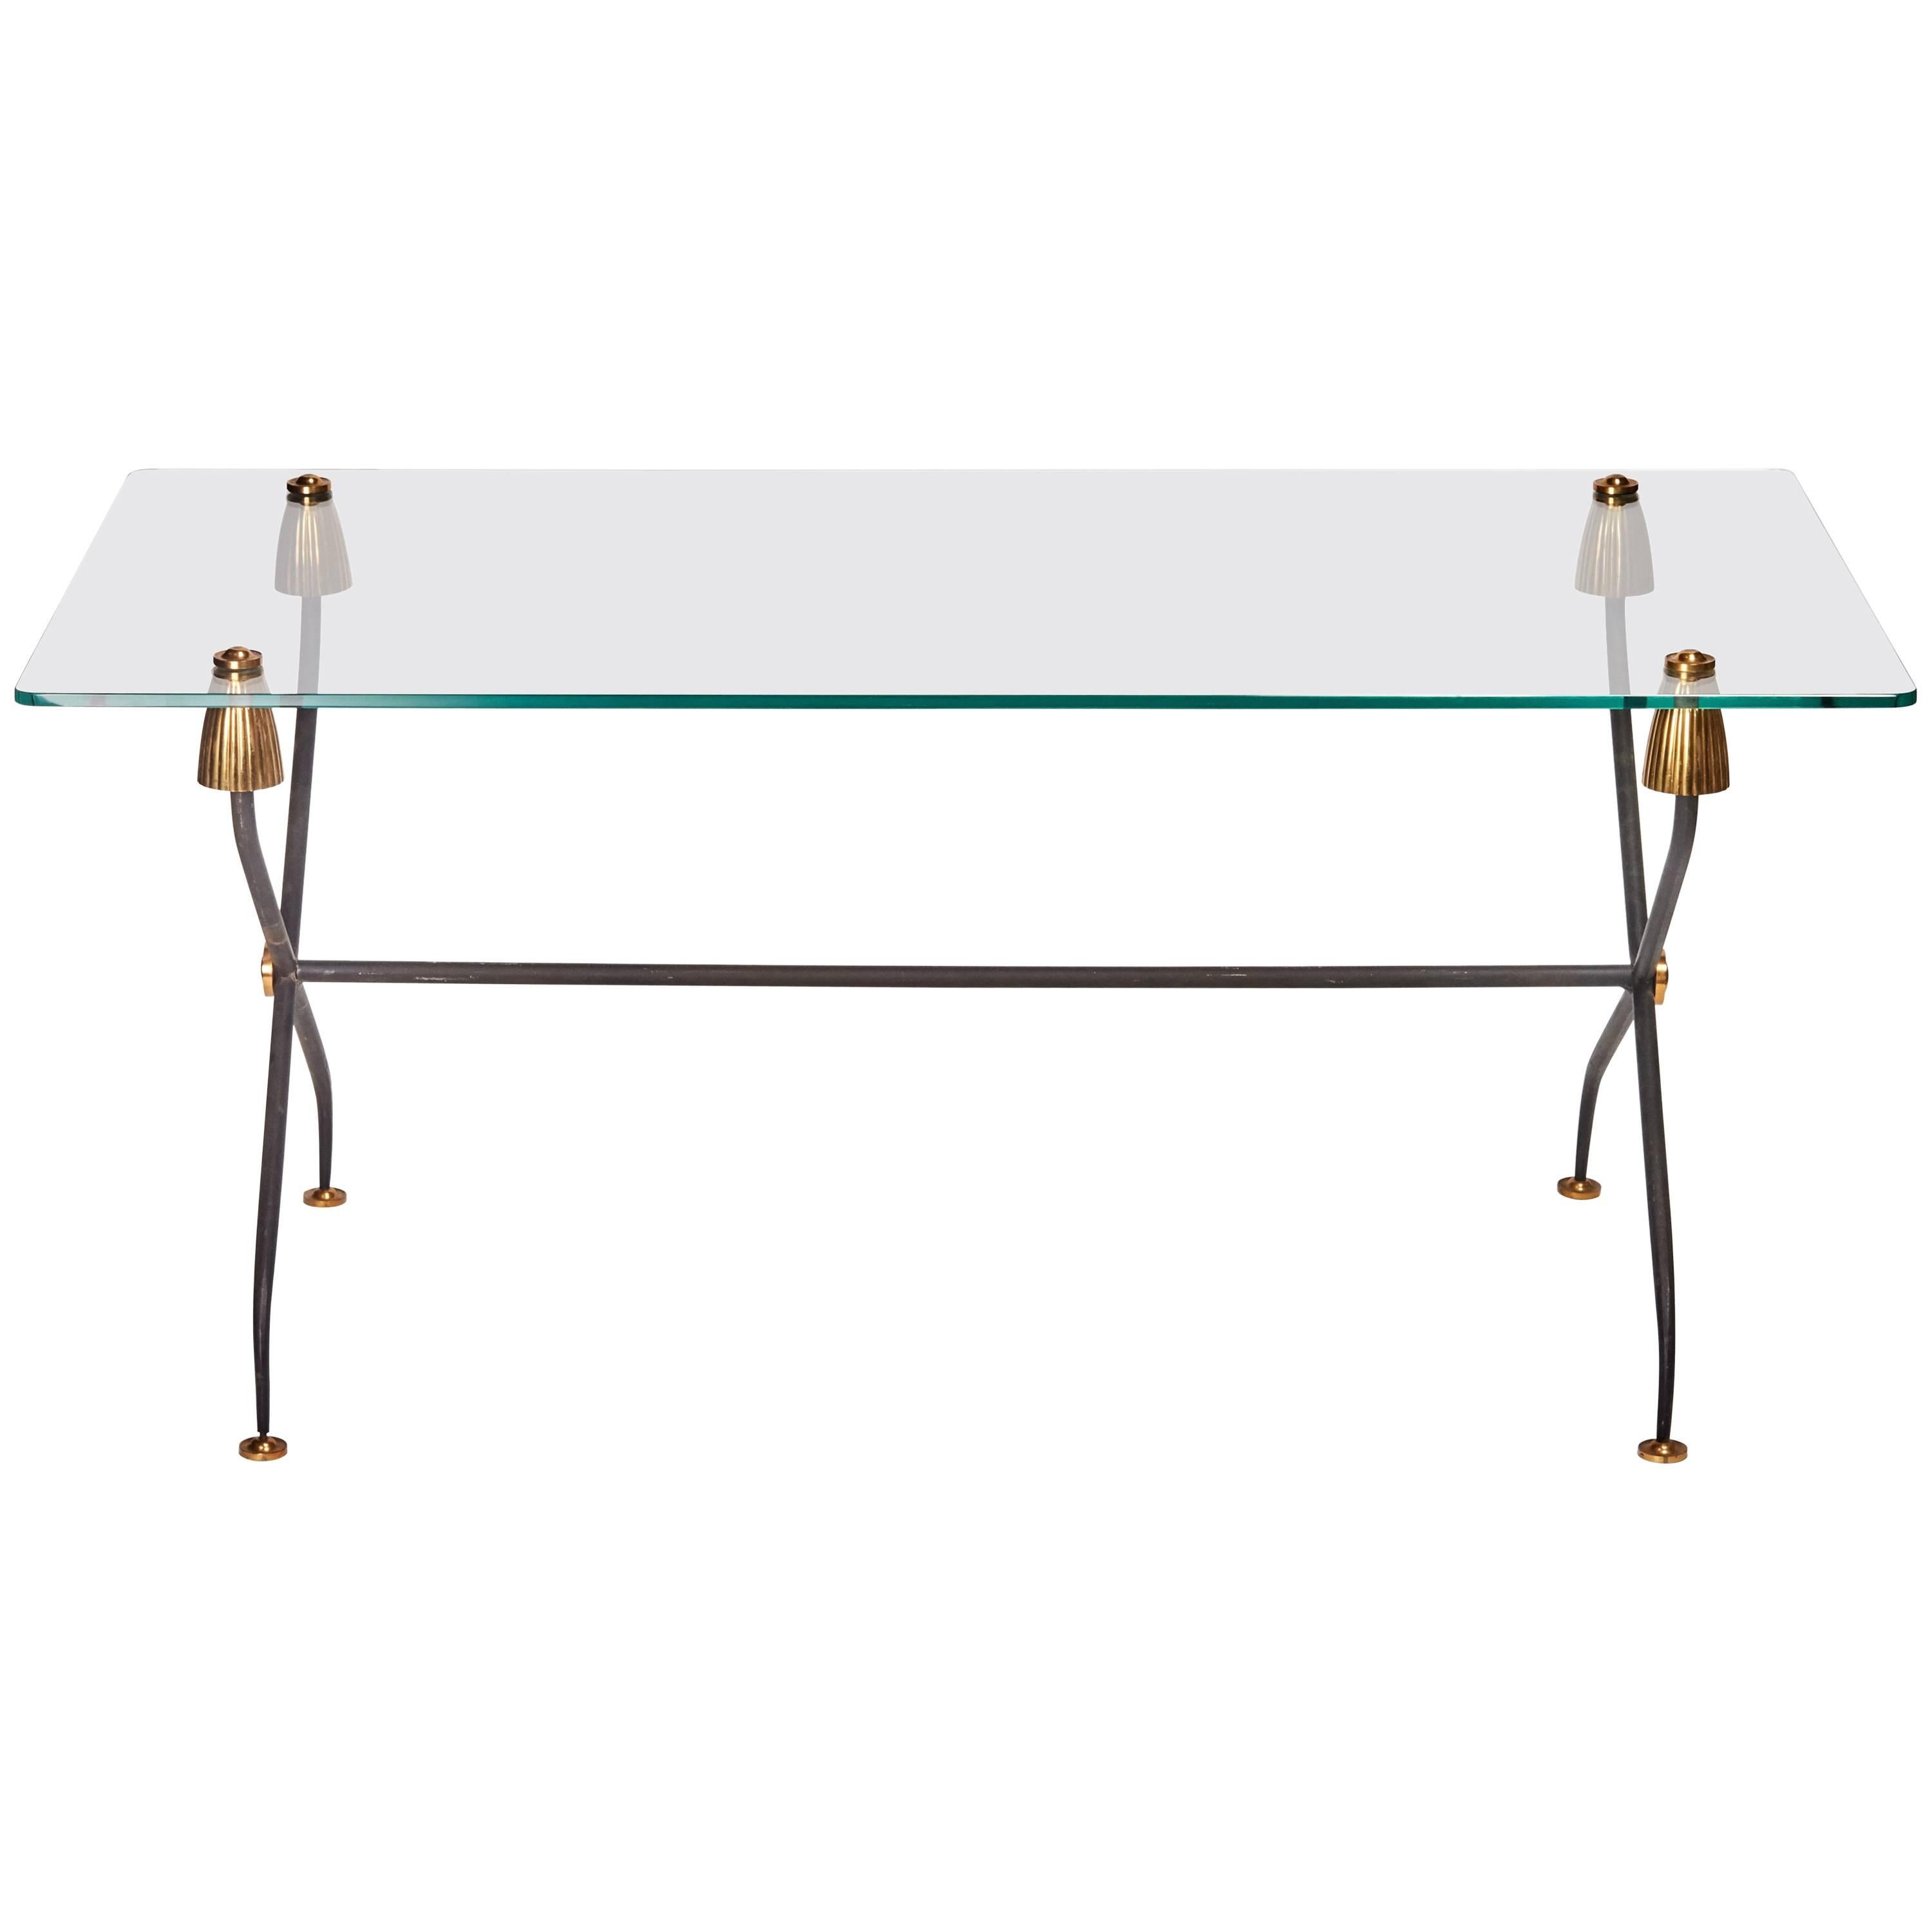 French Regency Brass, Iron, Glass Top Coffee or Cocktail Table